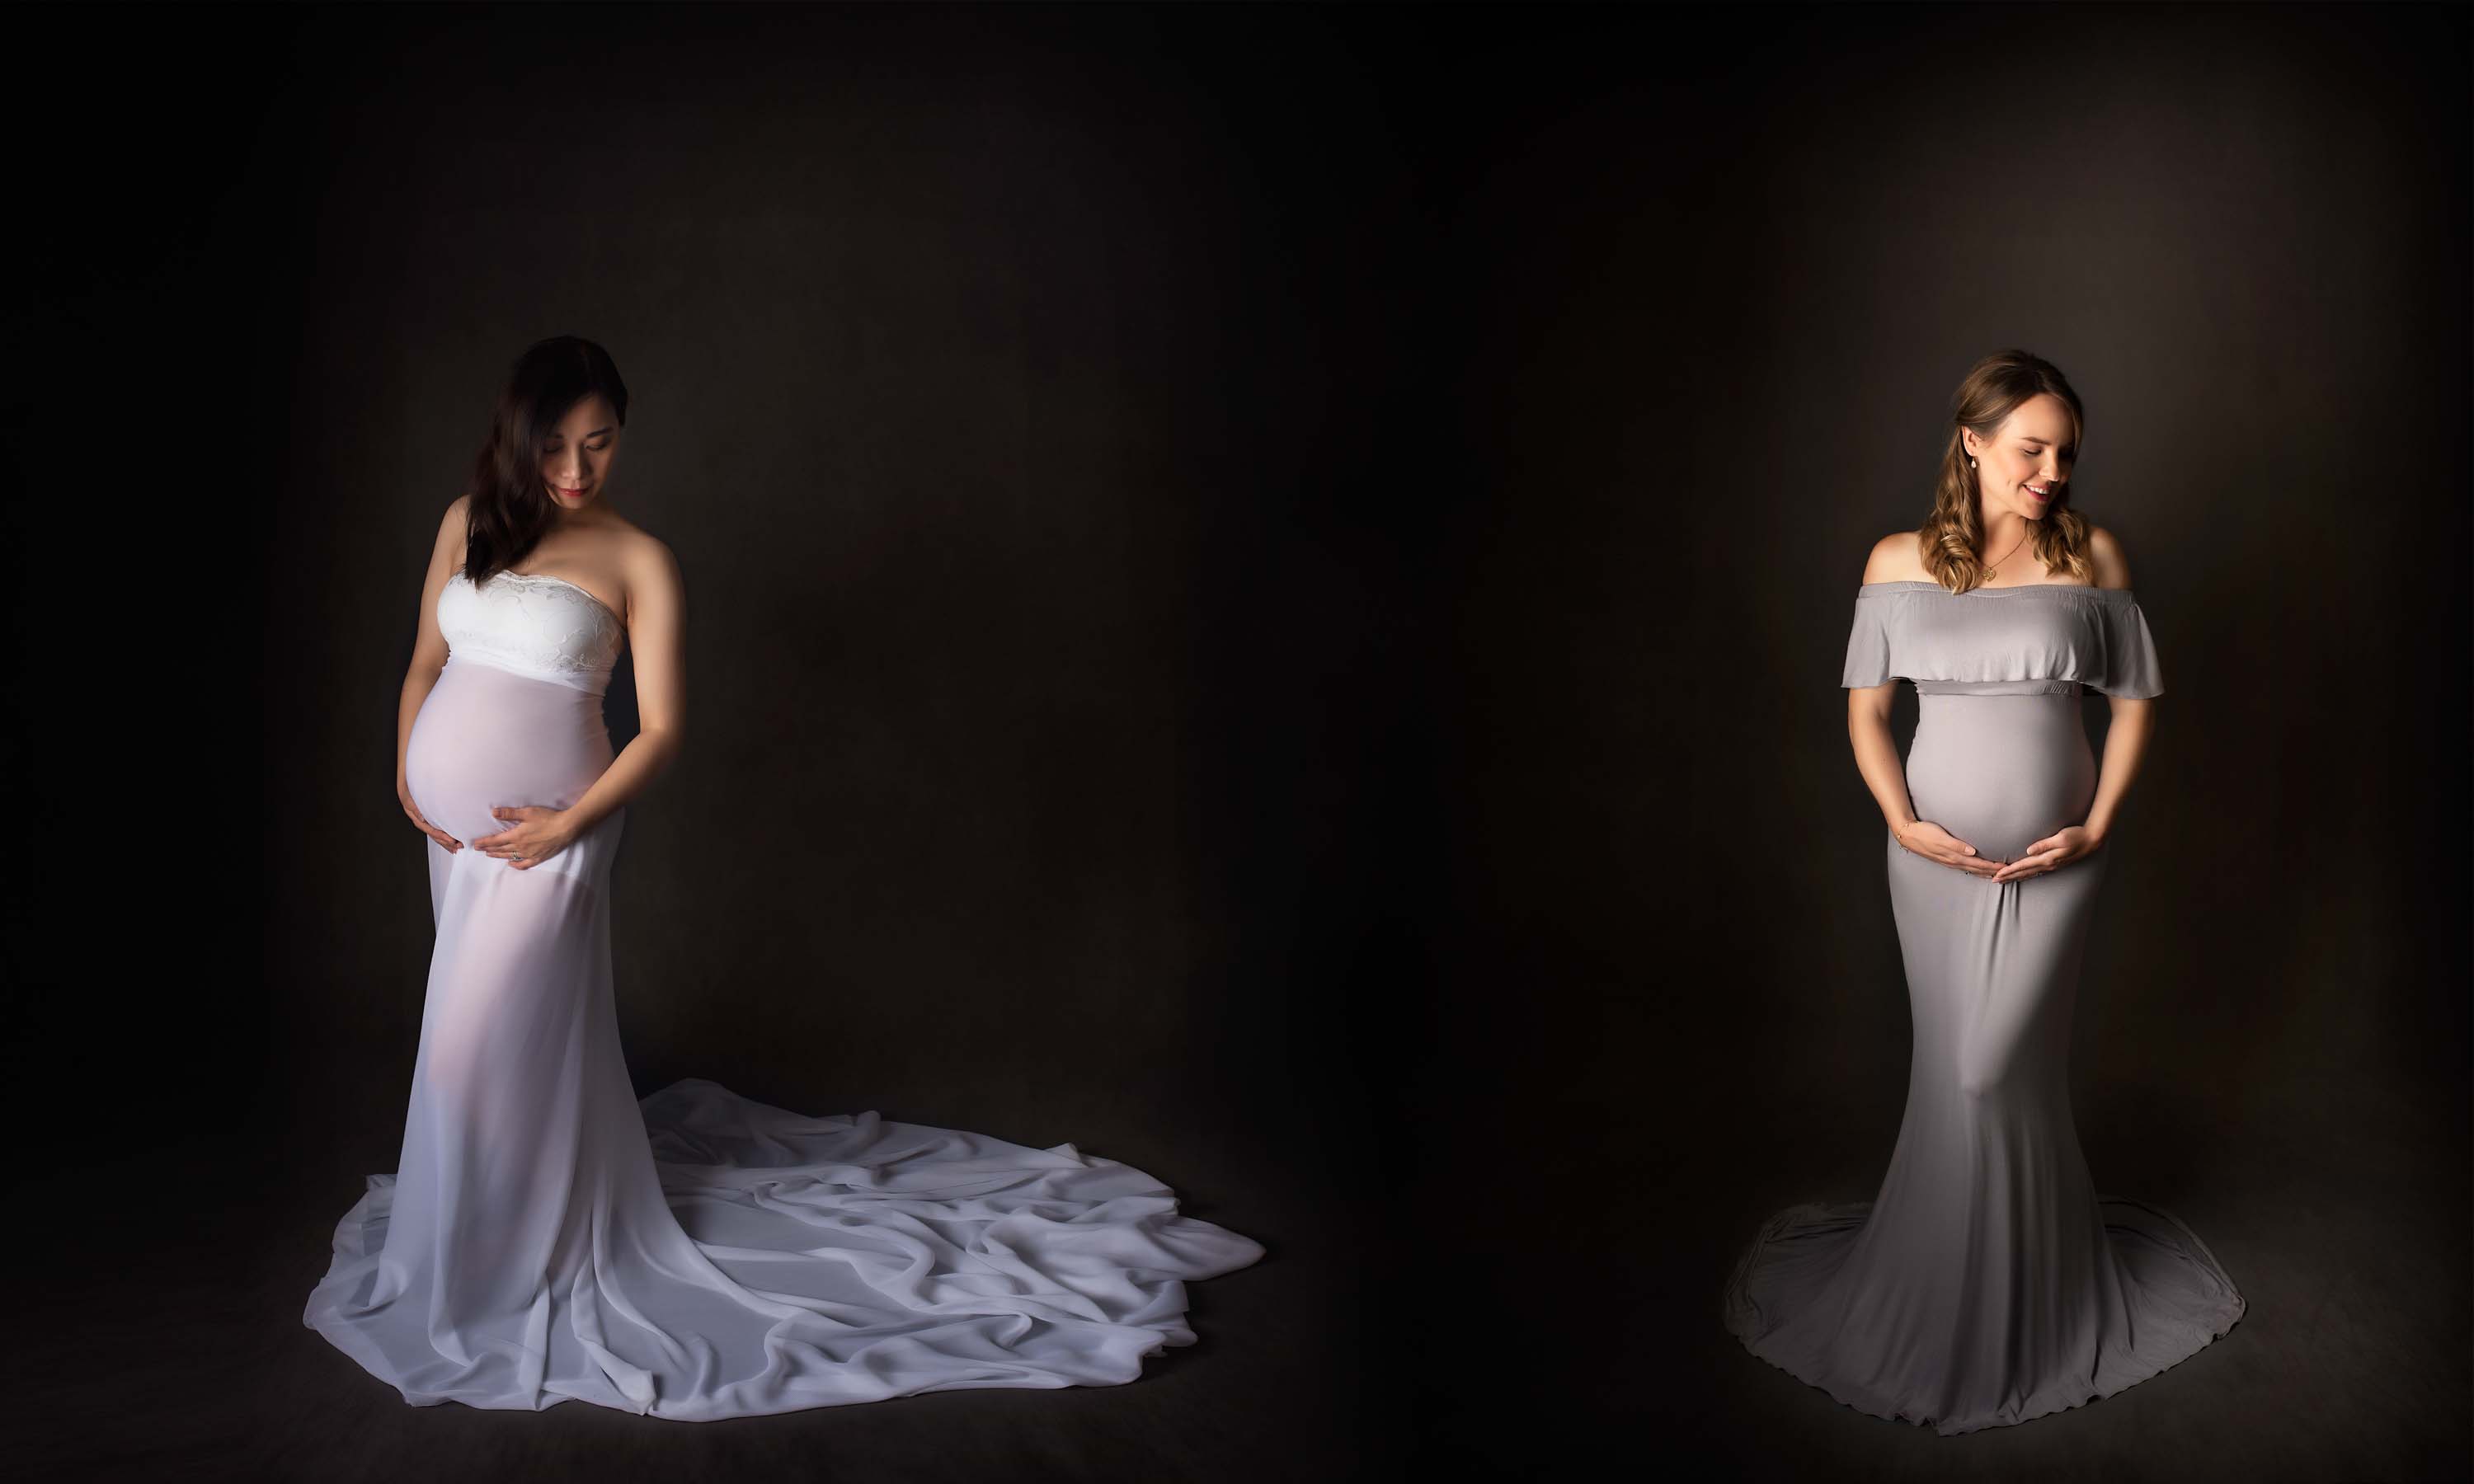 Maternity photoshoot for a Chinese lady wearing white gown and English women in grey dress